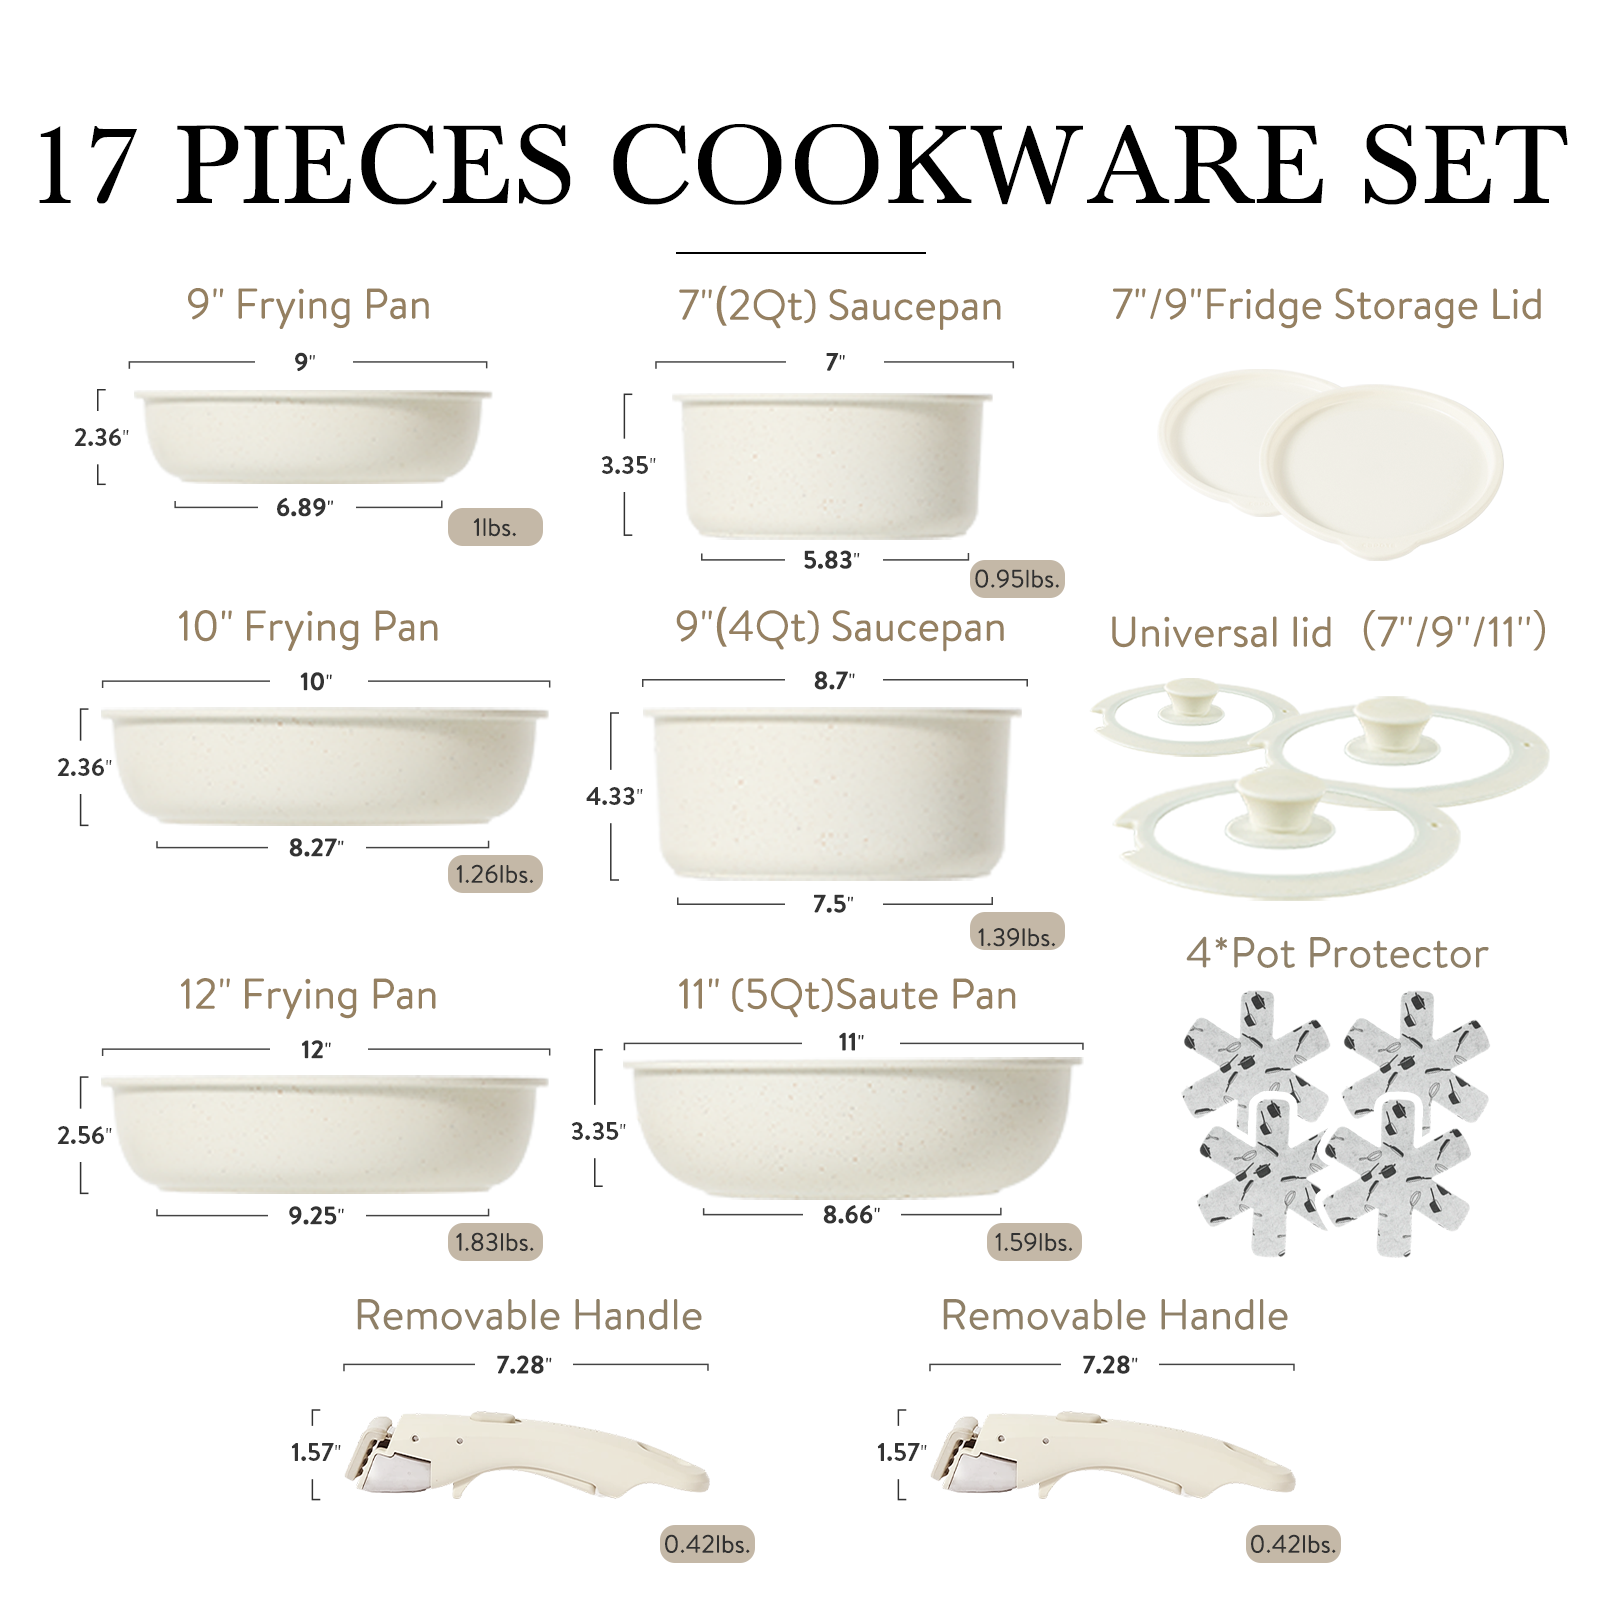 Carote Nonstick Cookware Sets, 17 Pcs Granite Non Stick Pots and Pans Set with Removable Handle - image 3 of 8